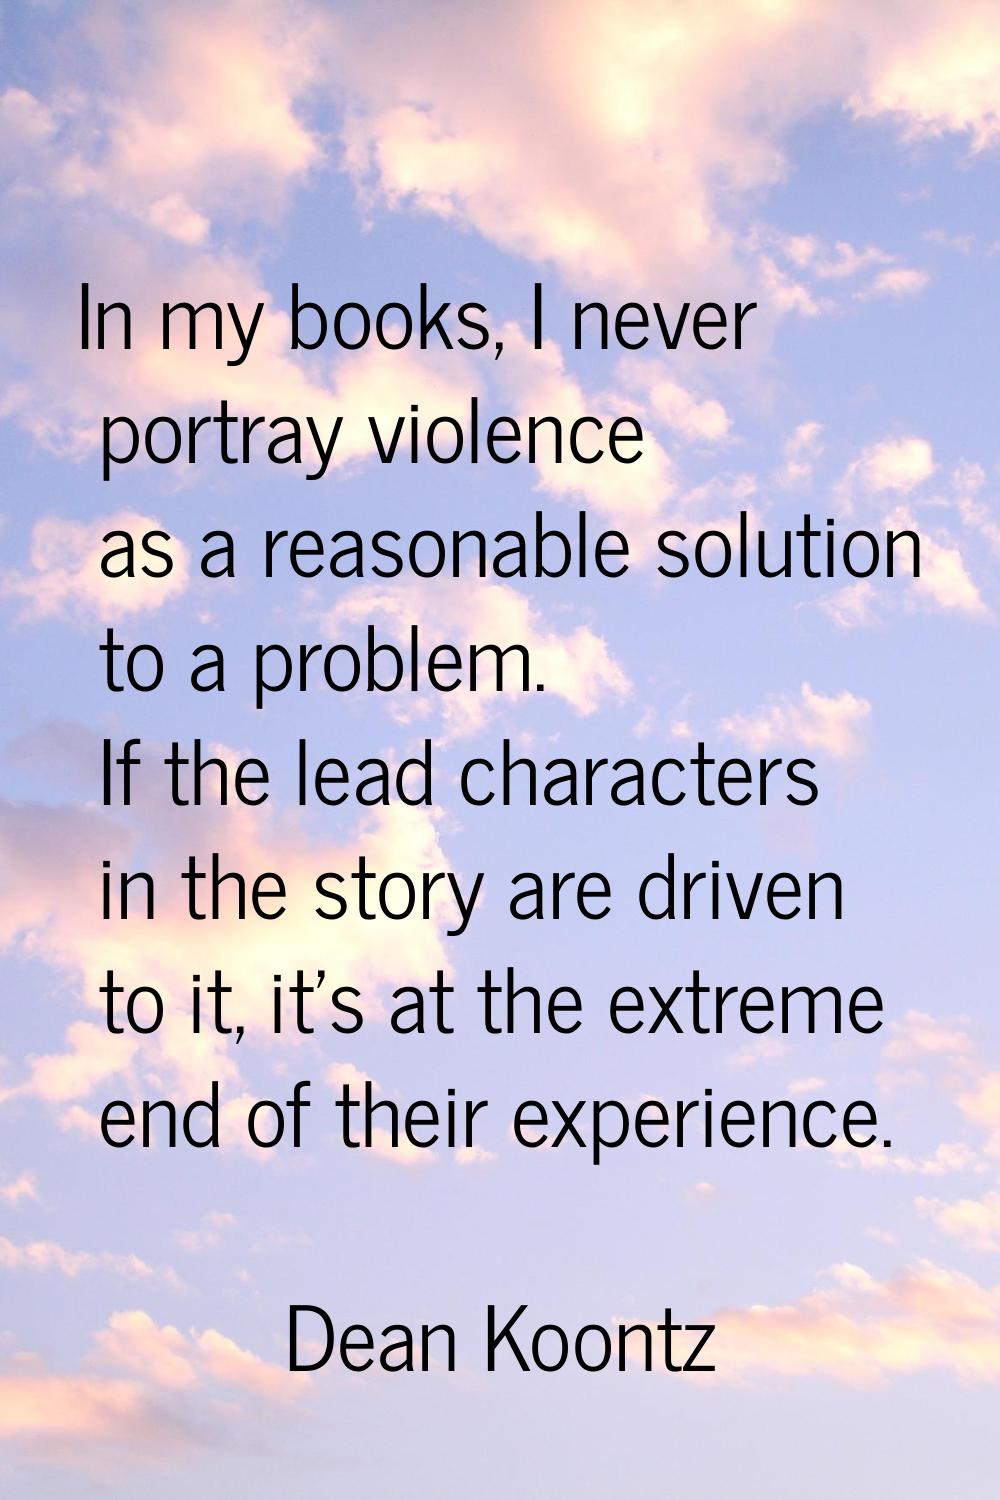 In my books, I never portray violence as a reasonable solution to a problem. If the lead characters